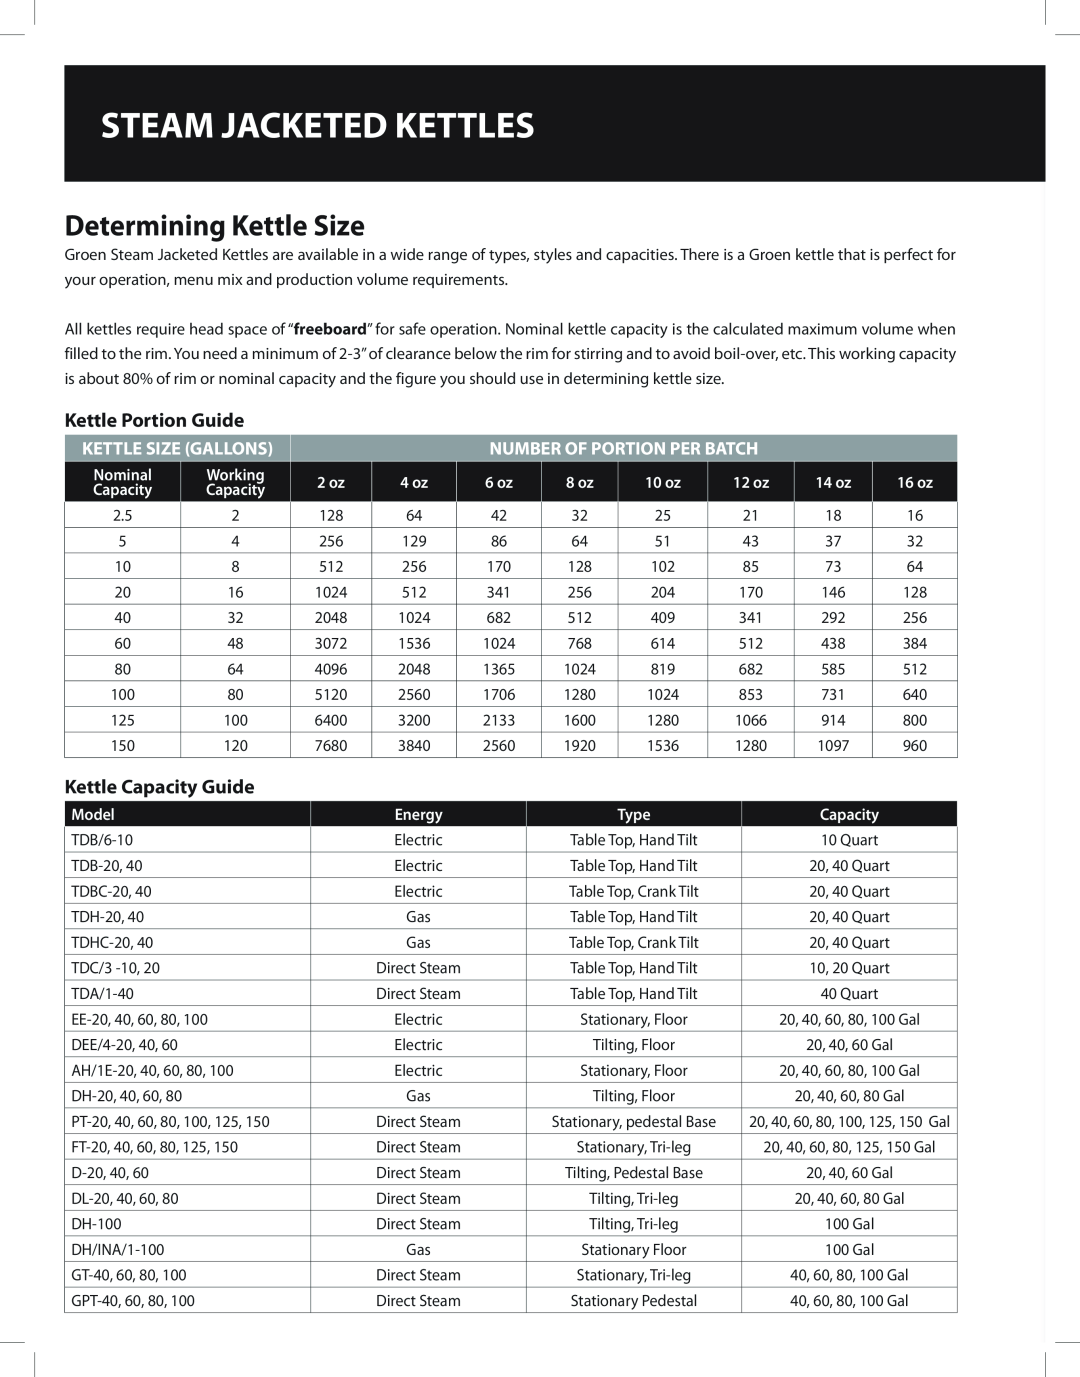 Unified Brands Steam Jacketed Kettles manual Determining Kettle Size, Kettle Portion Guide, Kettle Capacity Guide 